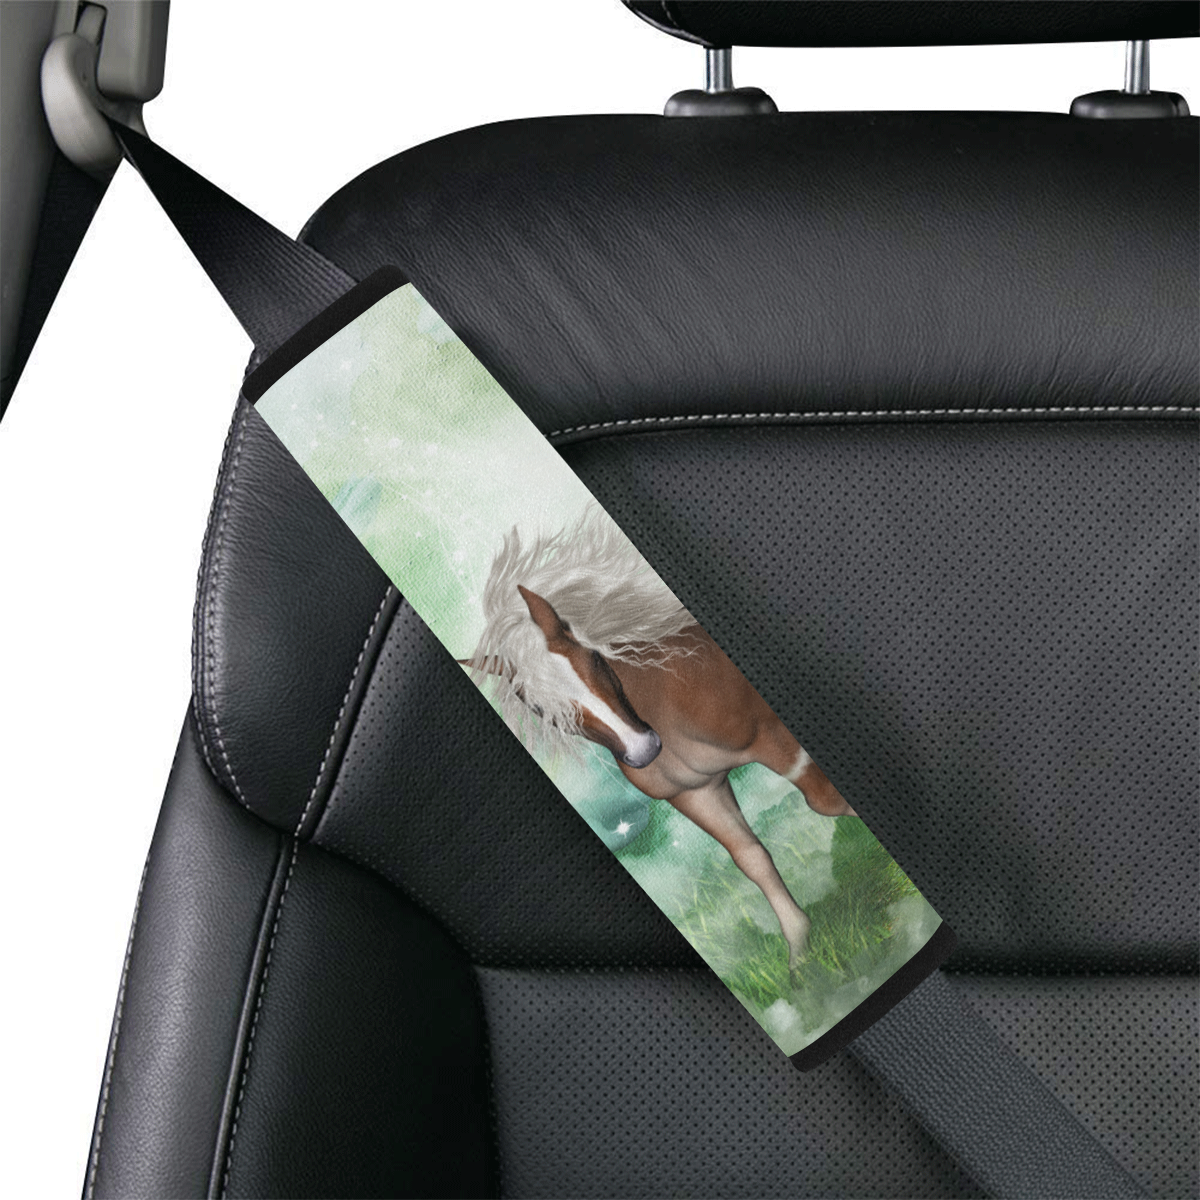 Horse in a fantasy world Car Seat Belt Cover 7''x12.6''